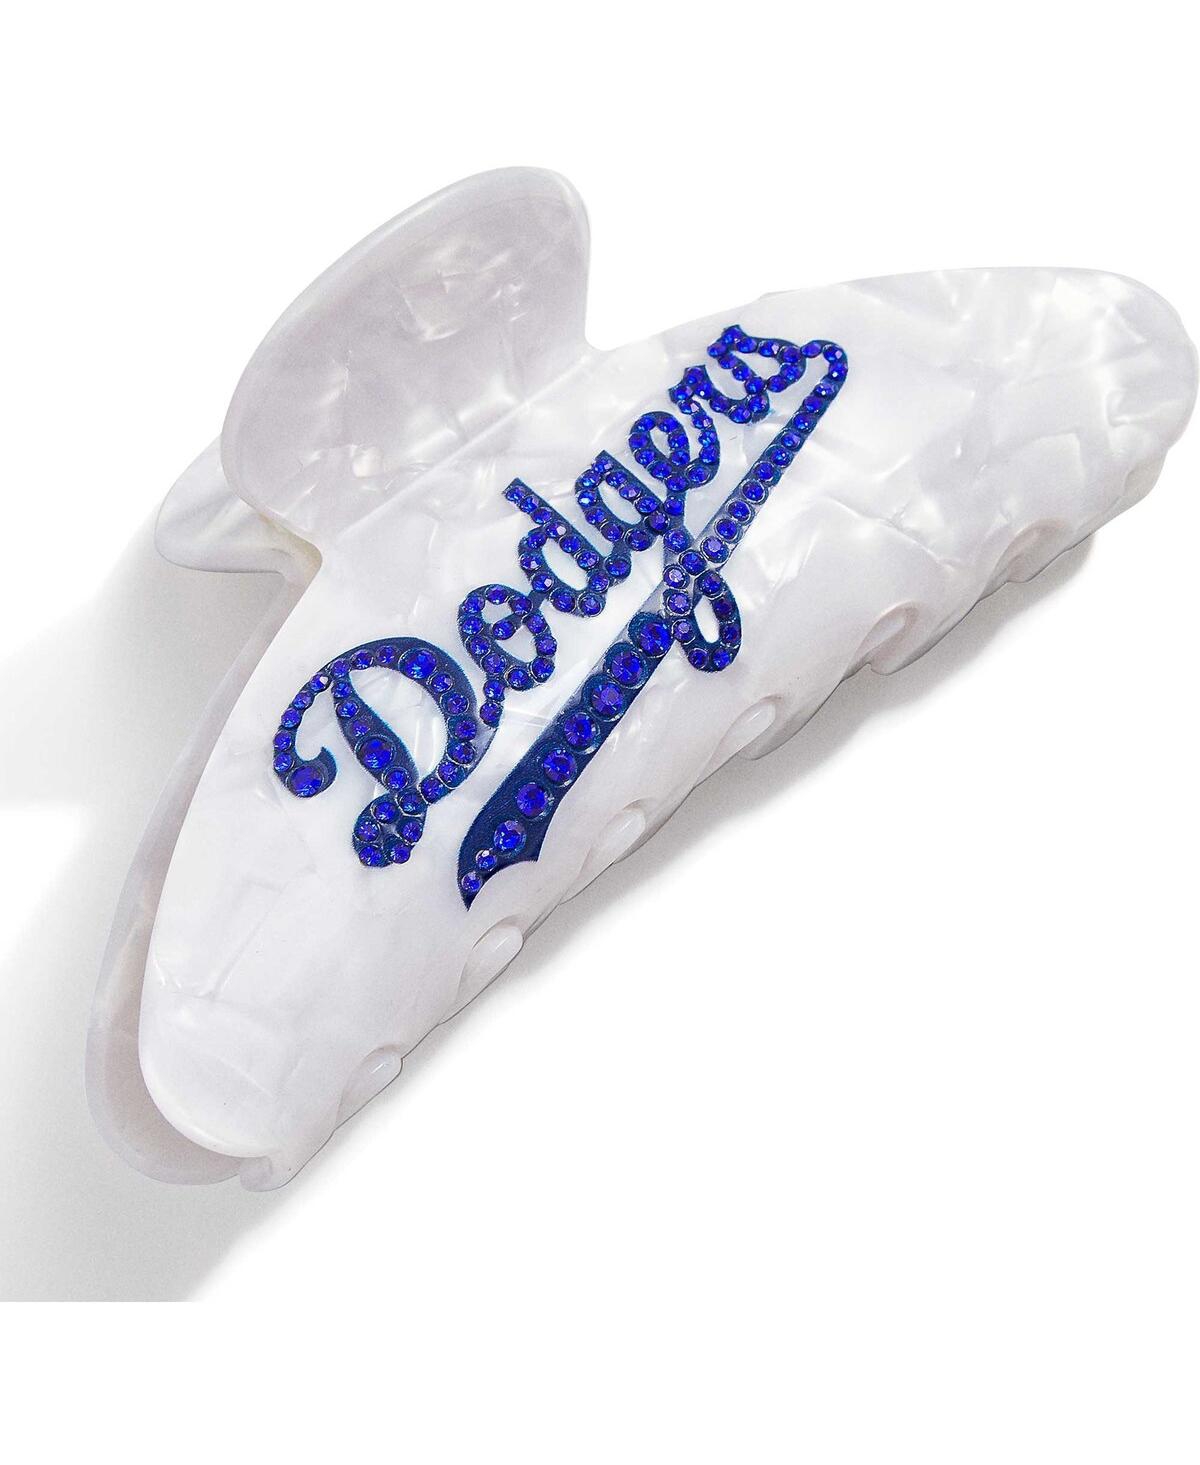 Women's Baublebar Los Angeles Dodgers Claw Hair Clip - White